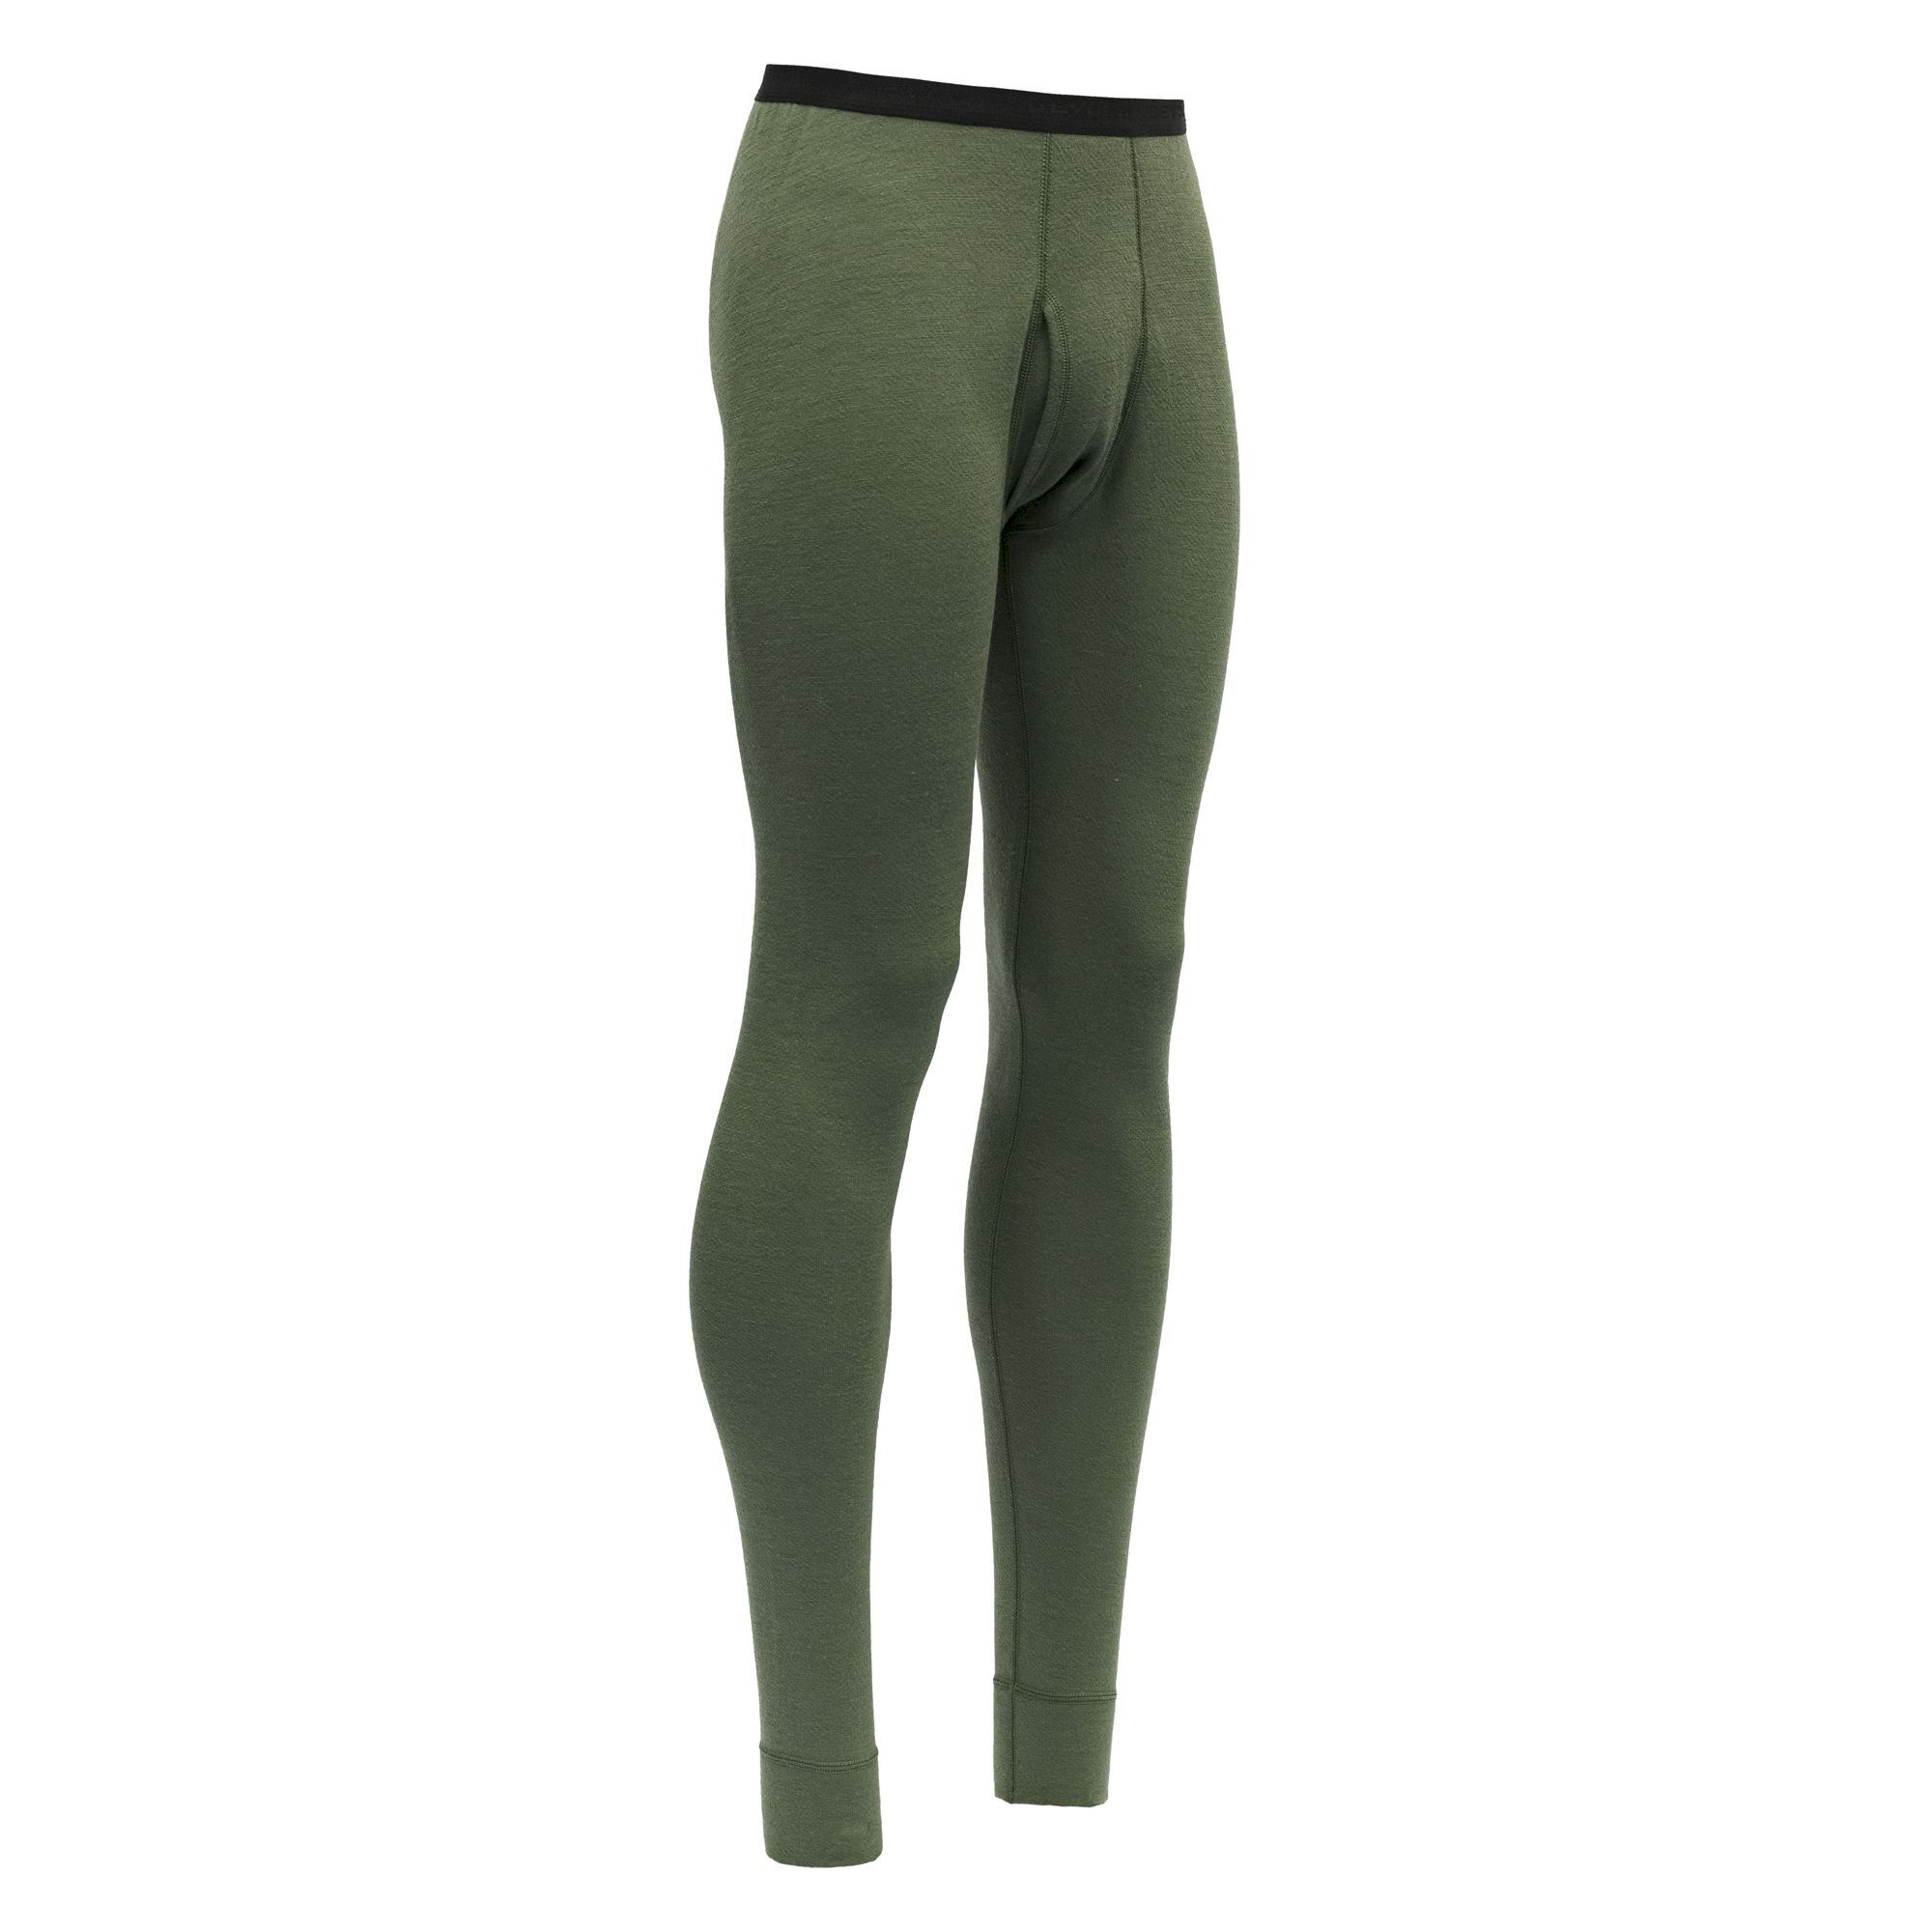 Devold Expedition Long Johns - Intimo - Uomo